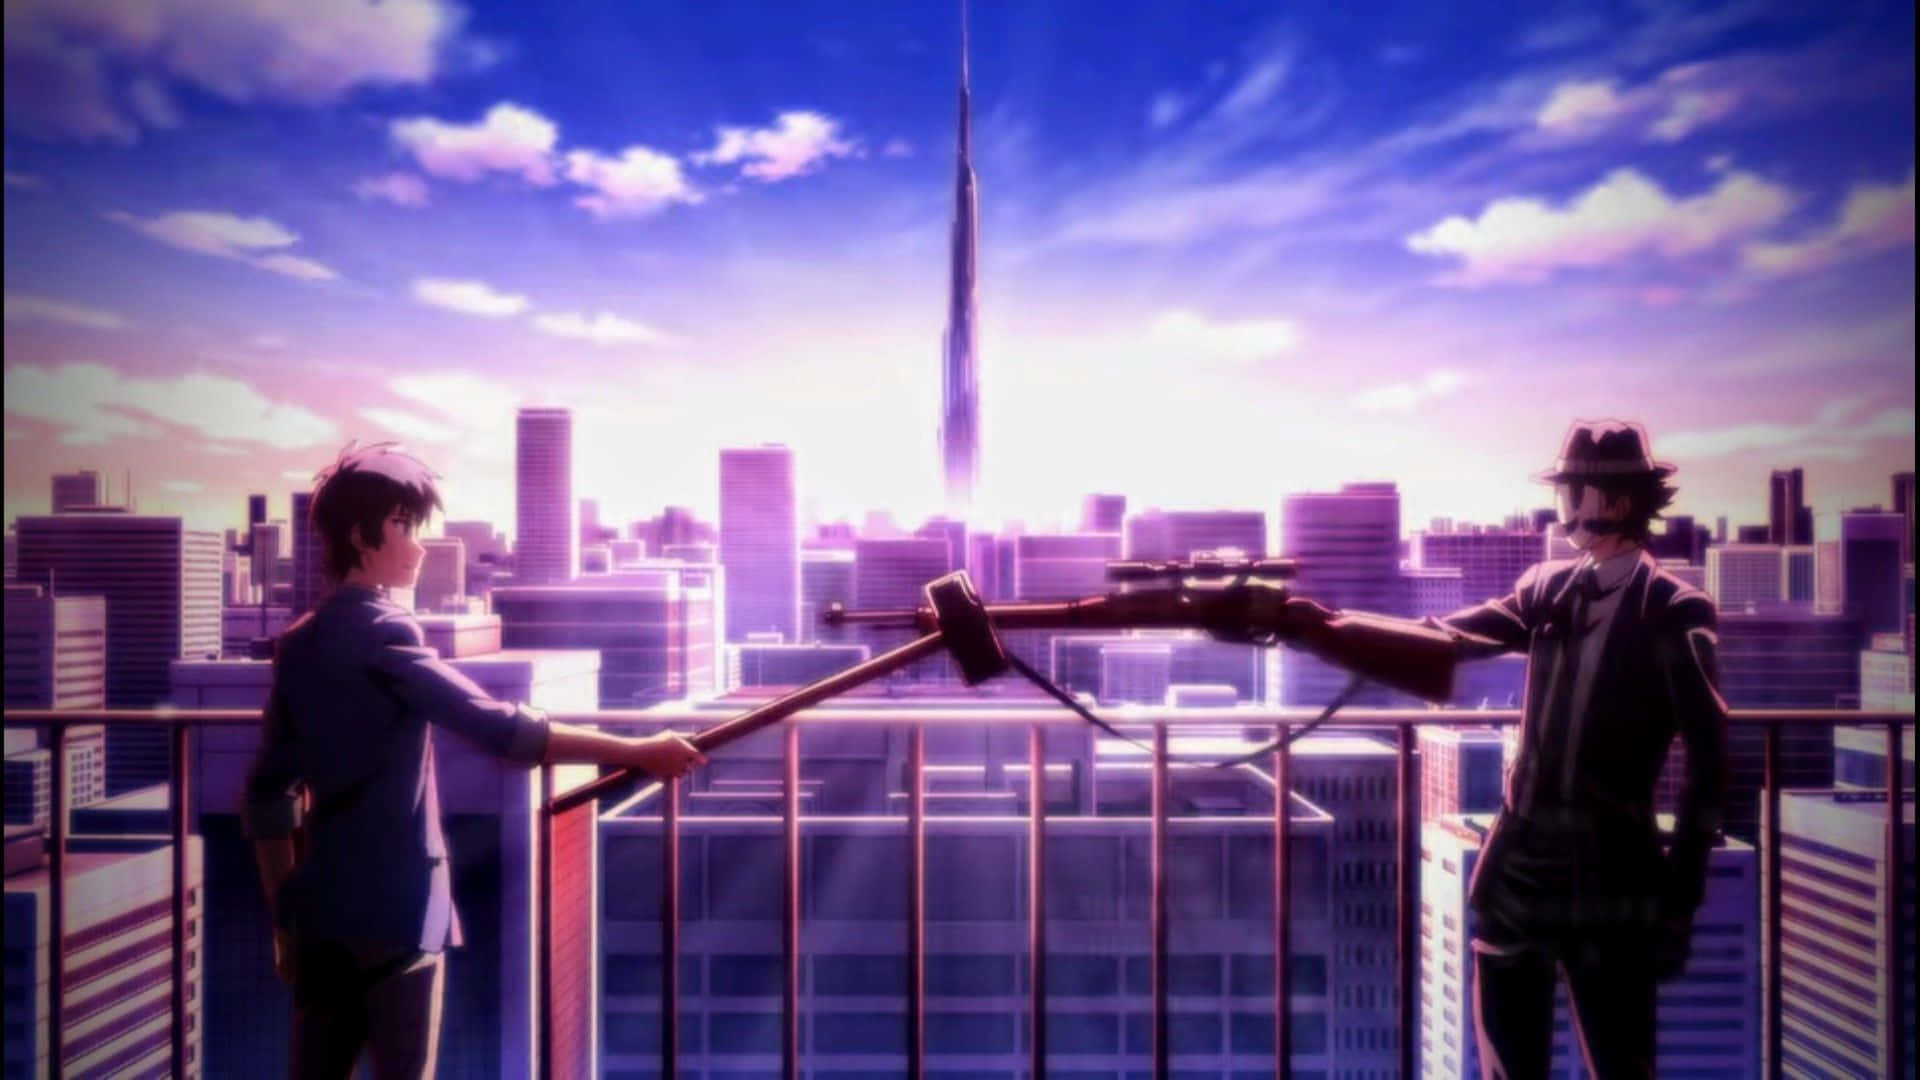 Two Anime Characters Standing On A Balcony With A City View